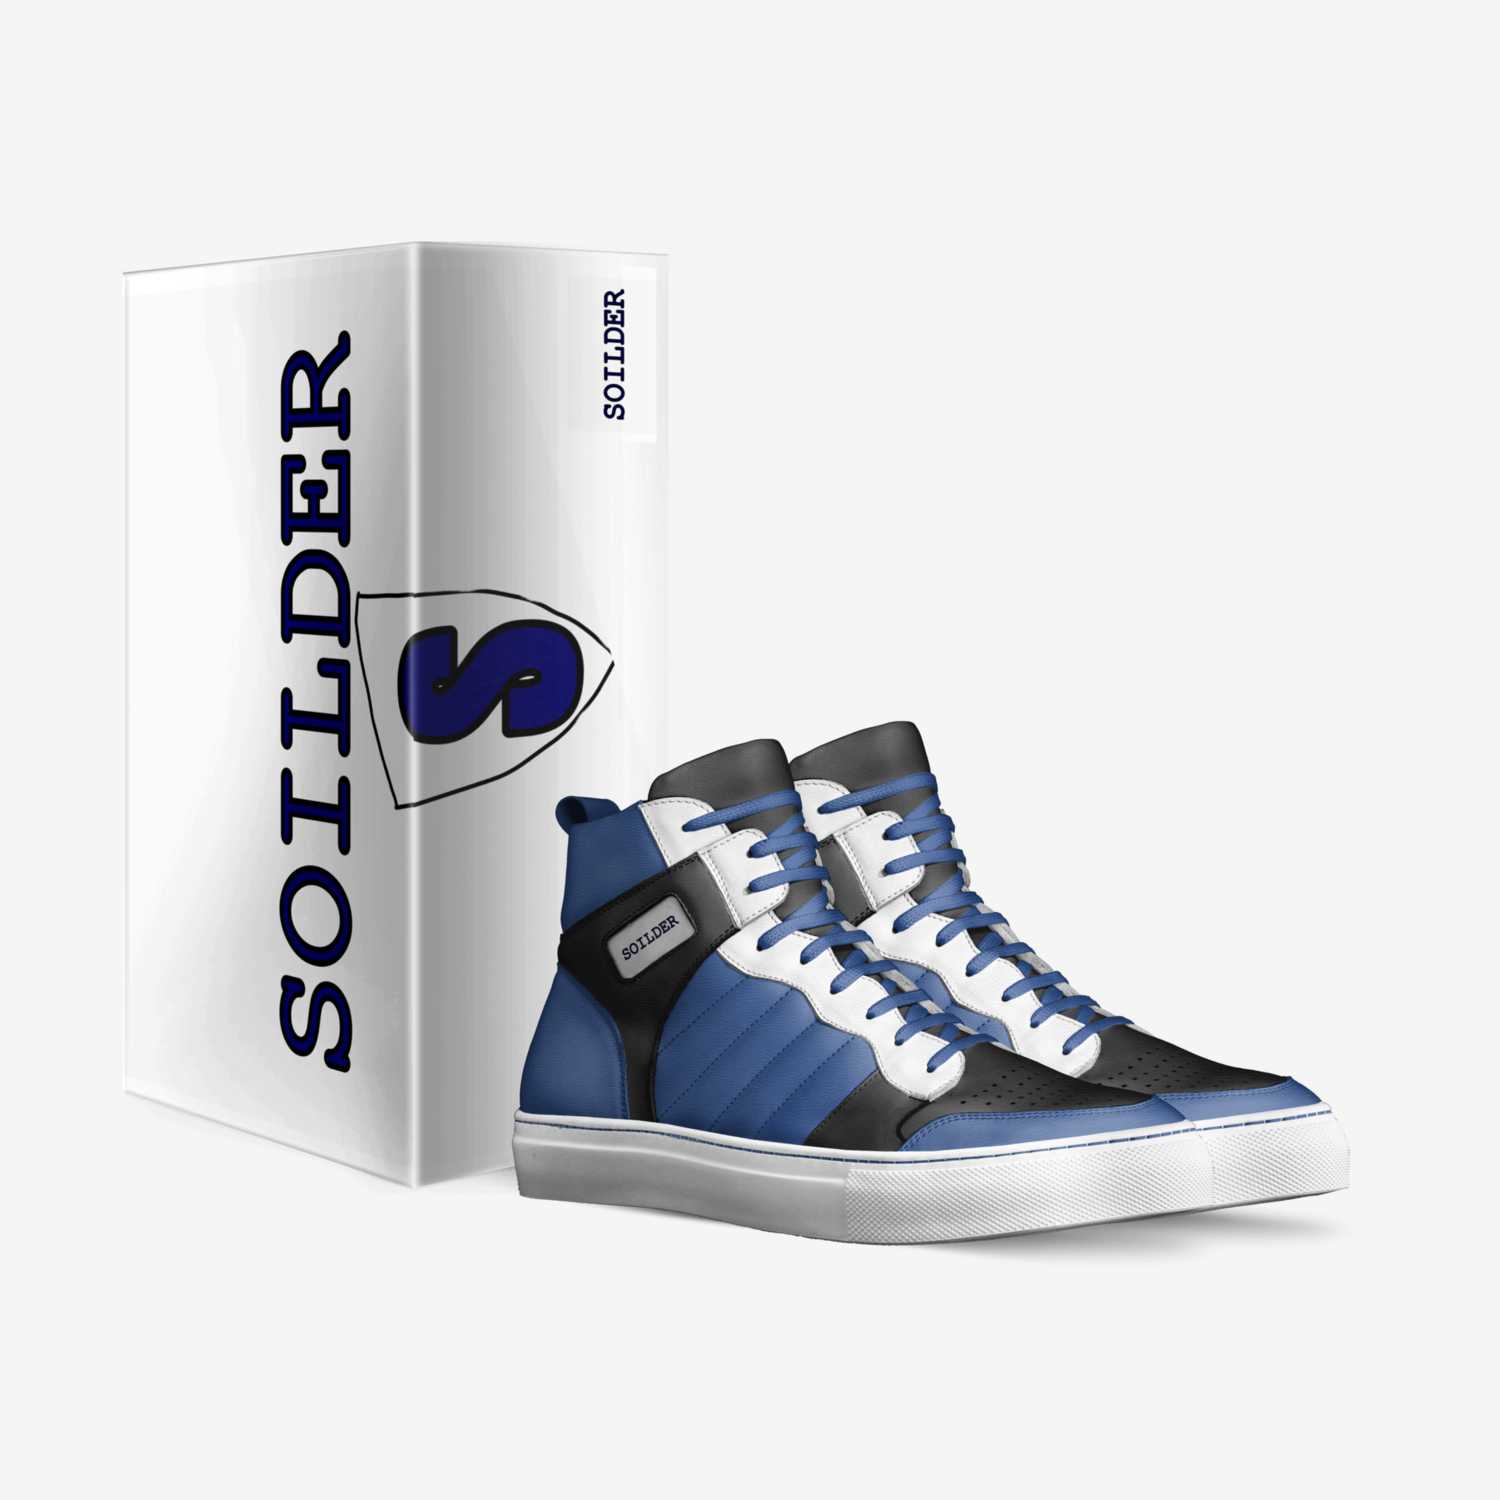 Soilder custom made in Italy shoes by Soldier Boi | Box view